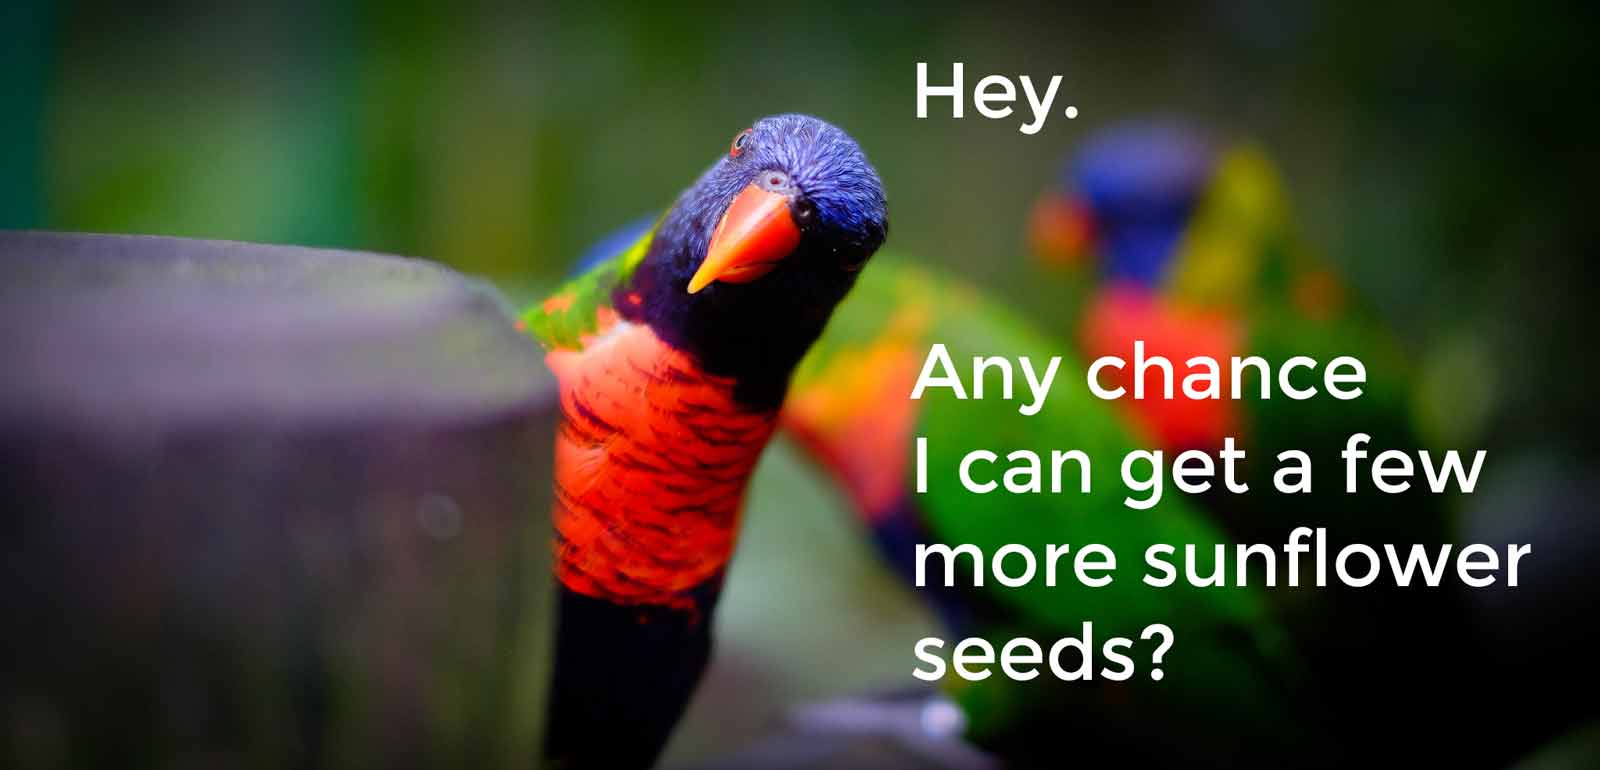 15-04-28-bank-customer-wants-some-seeds-please